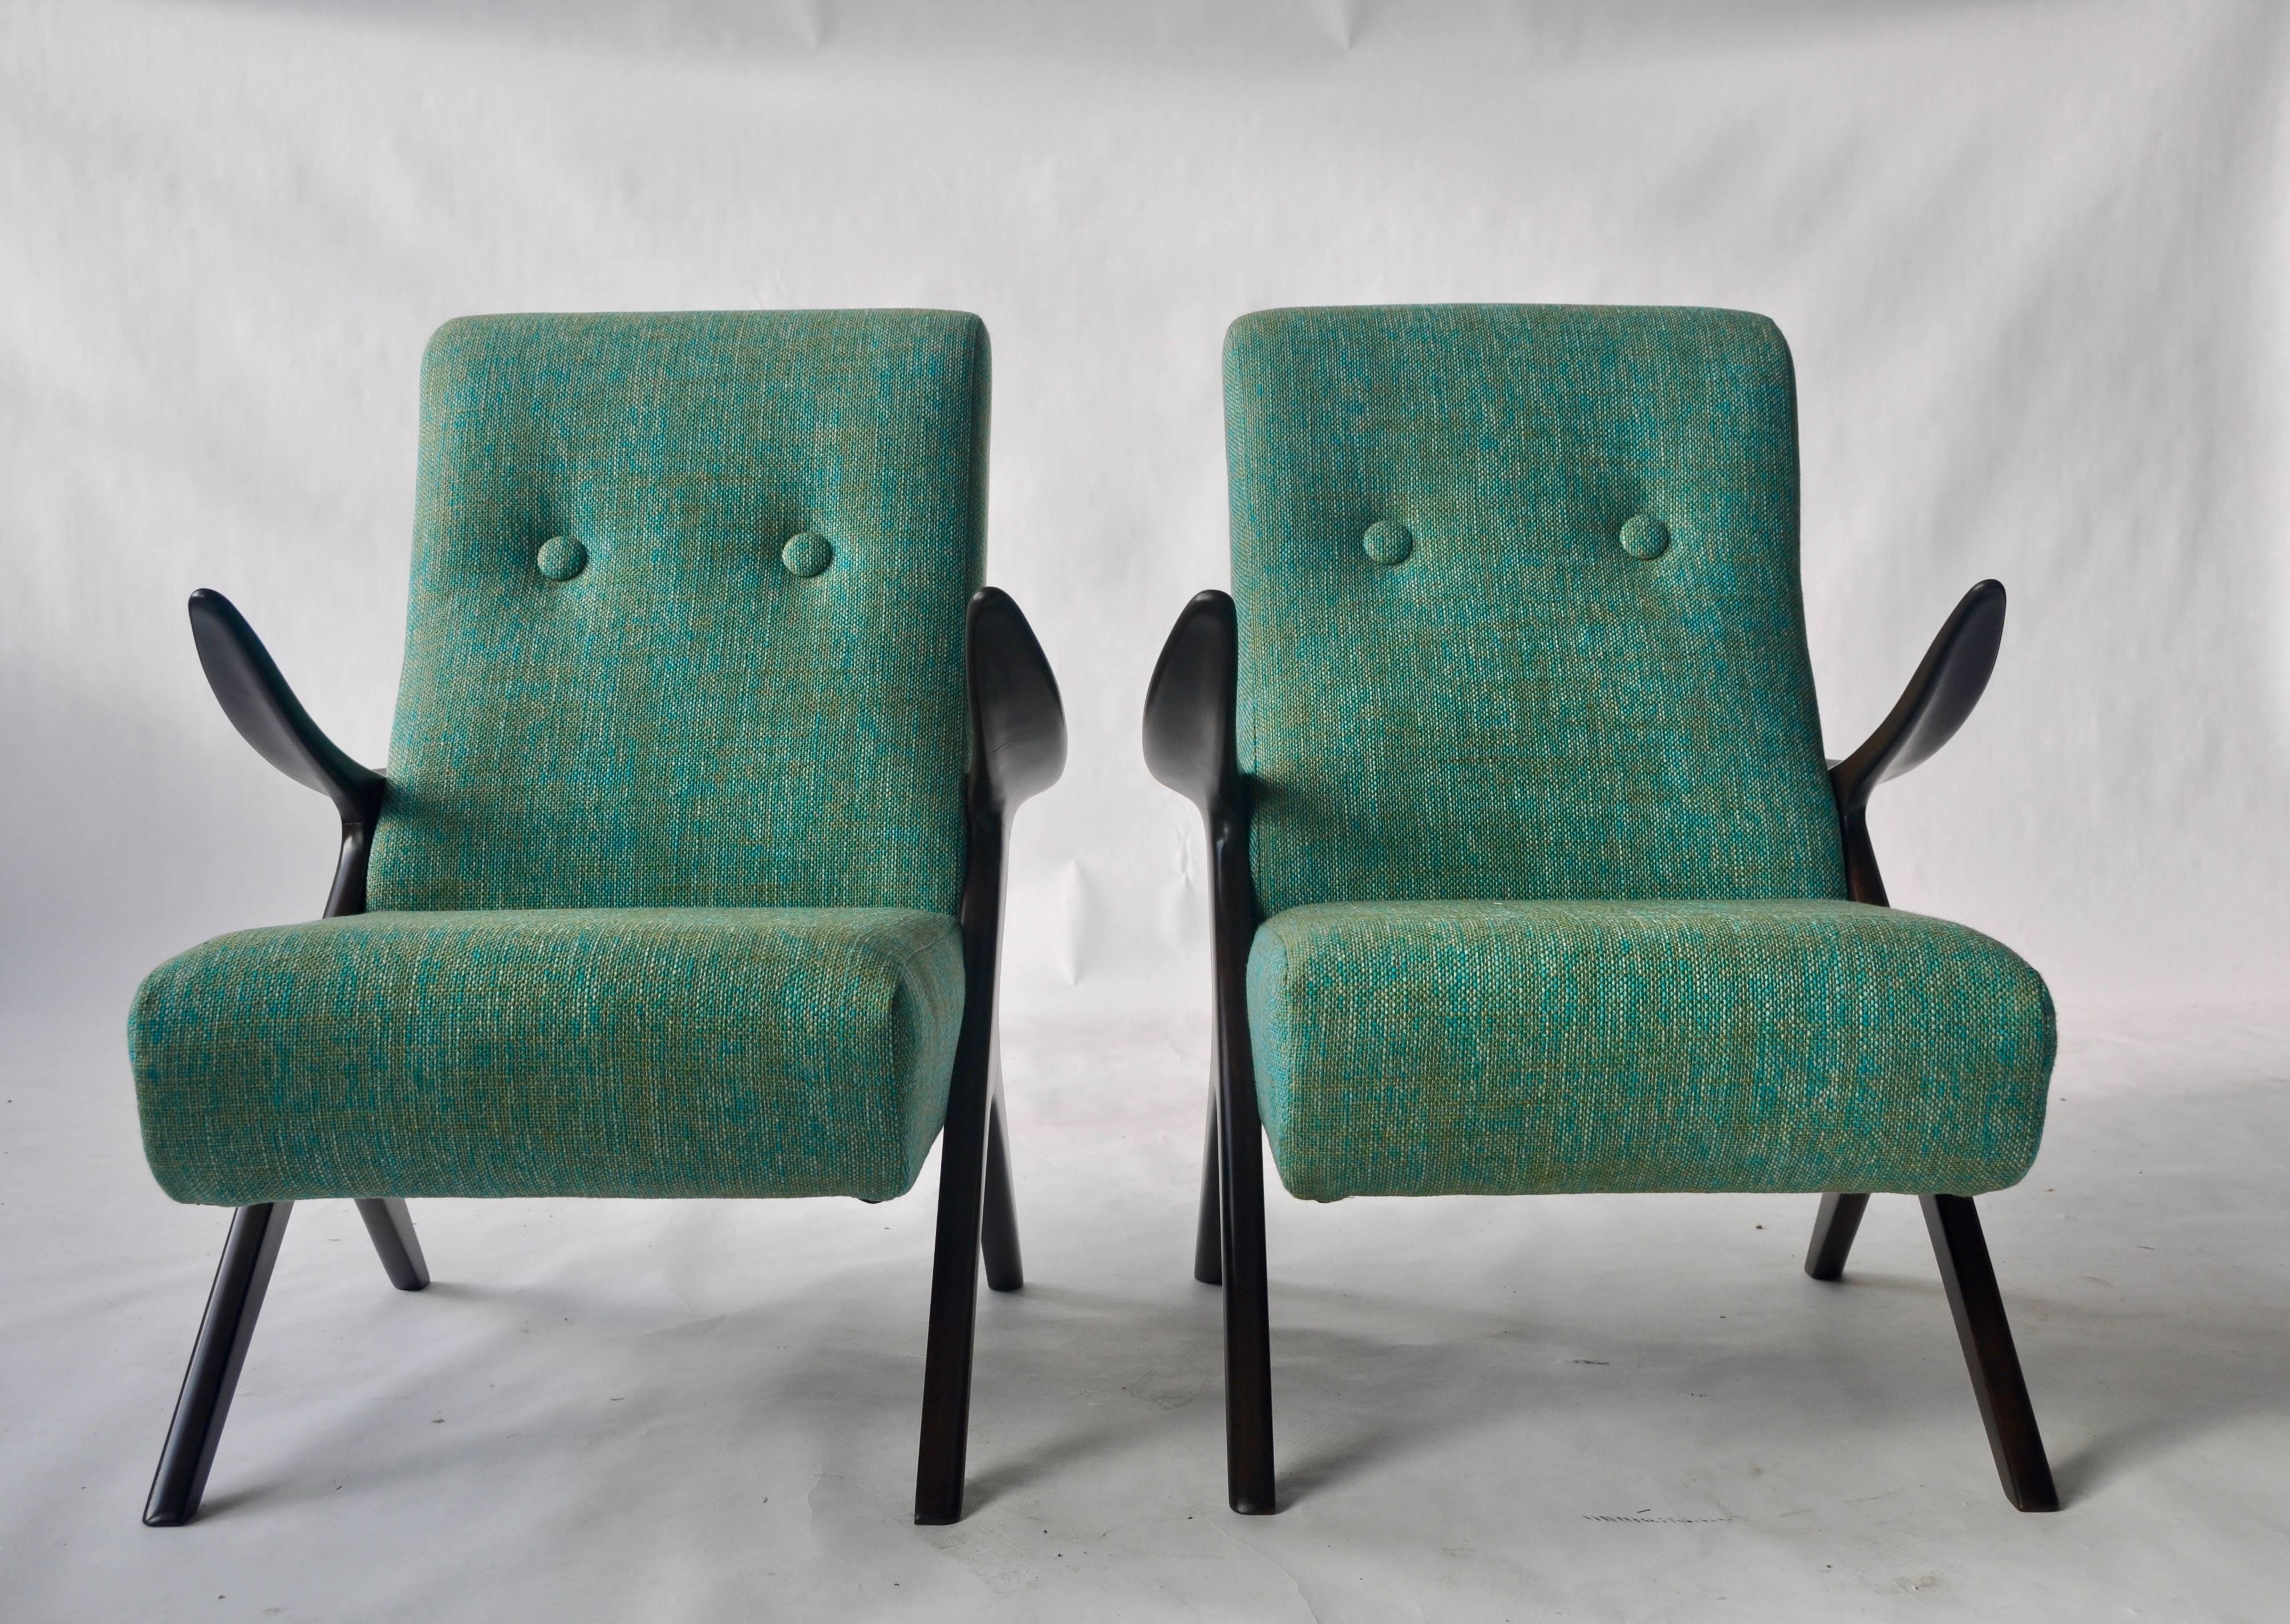 Pair of sculptural Danish lounge chairs.